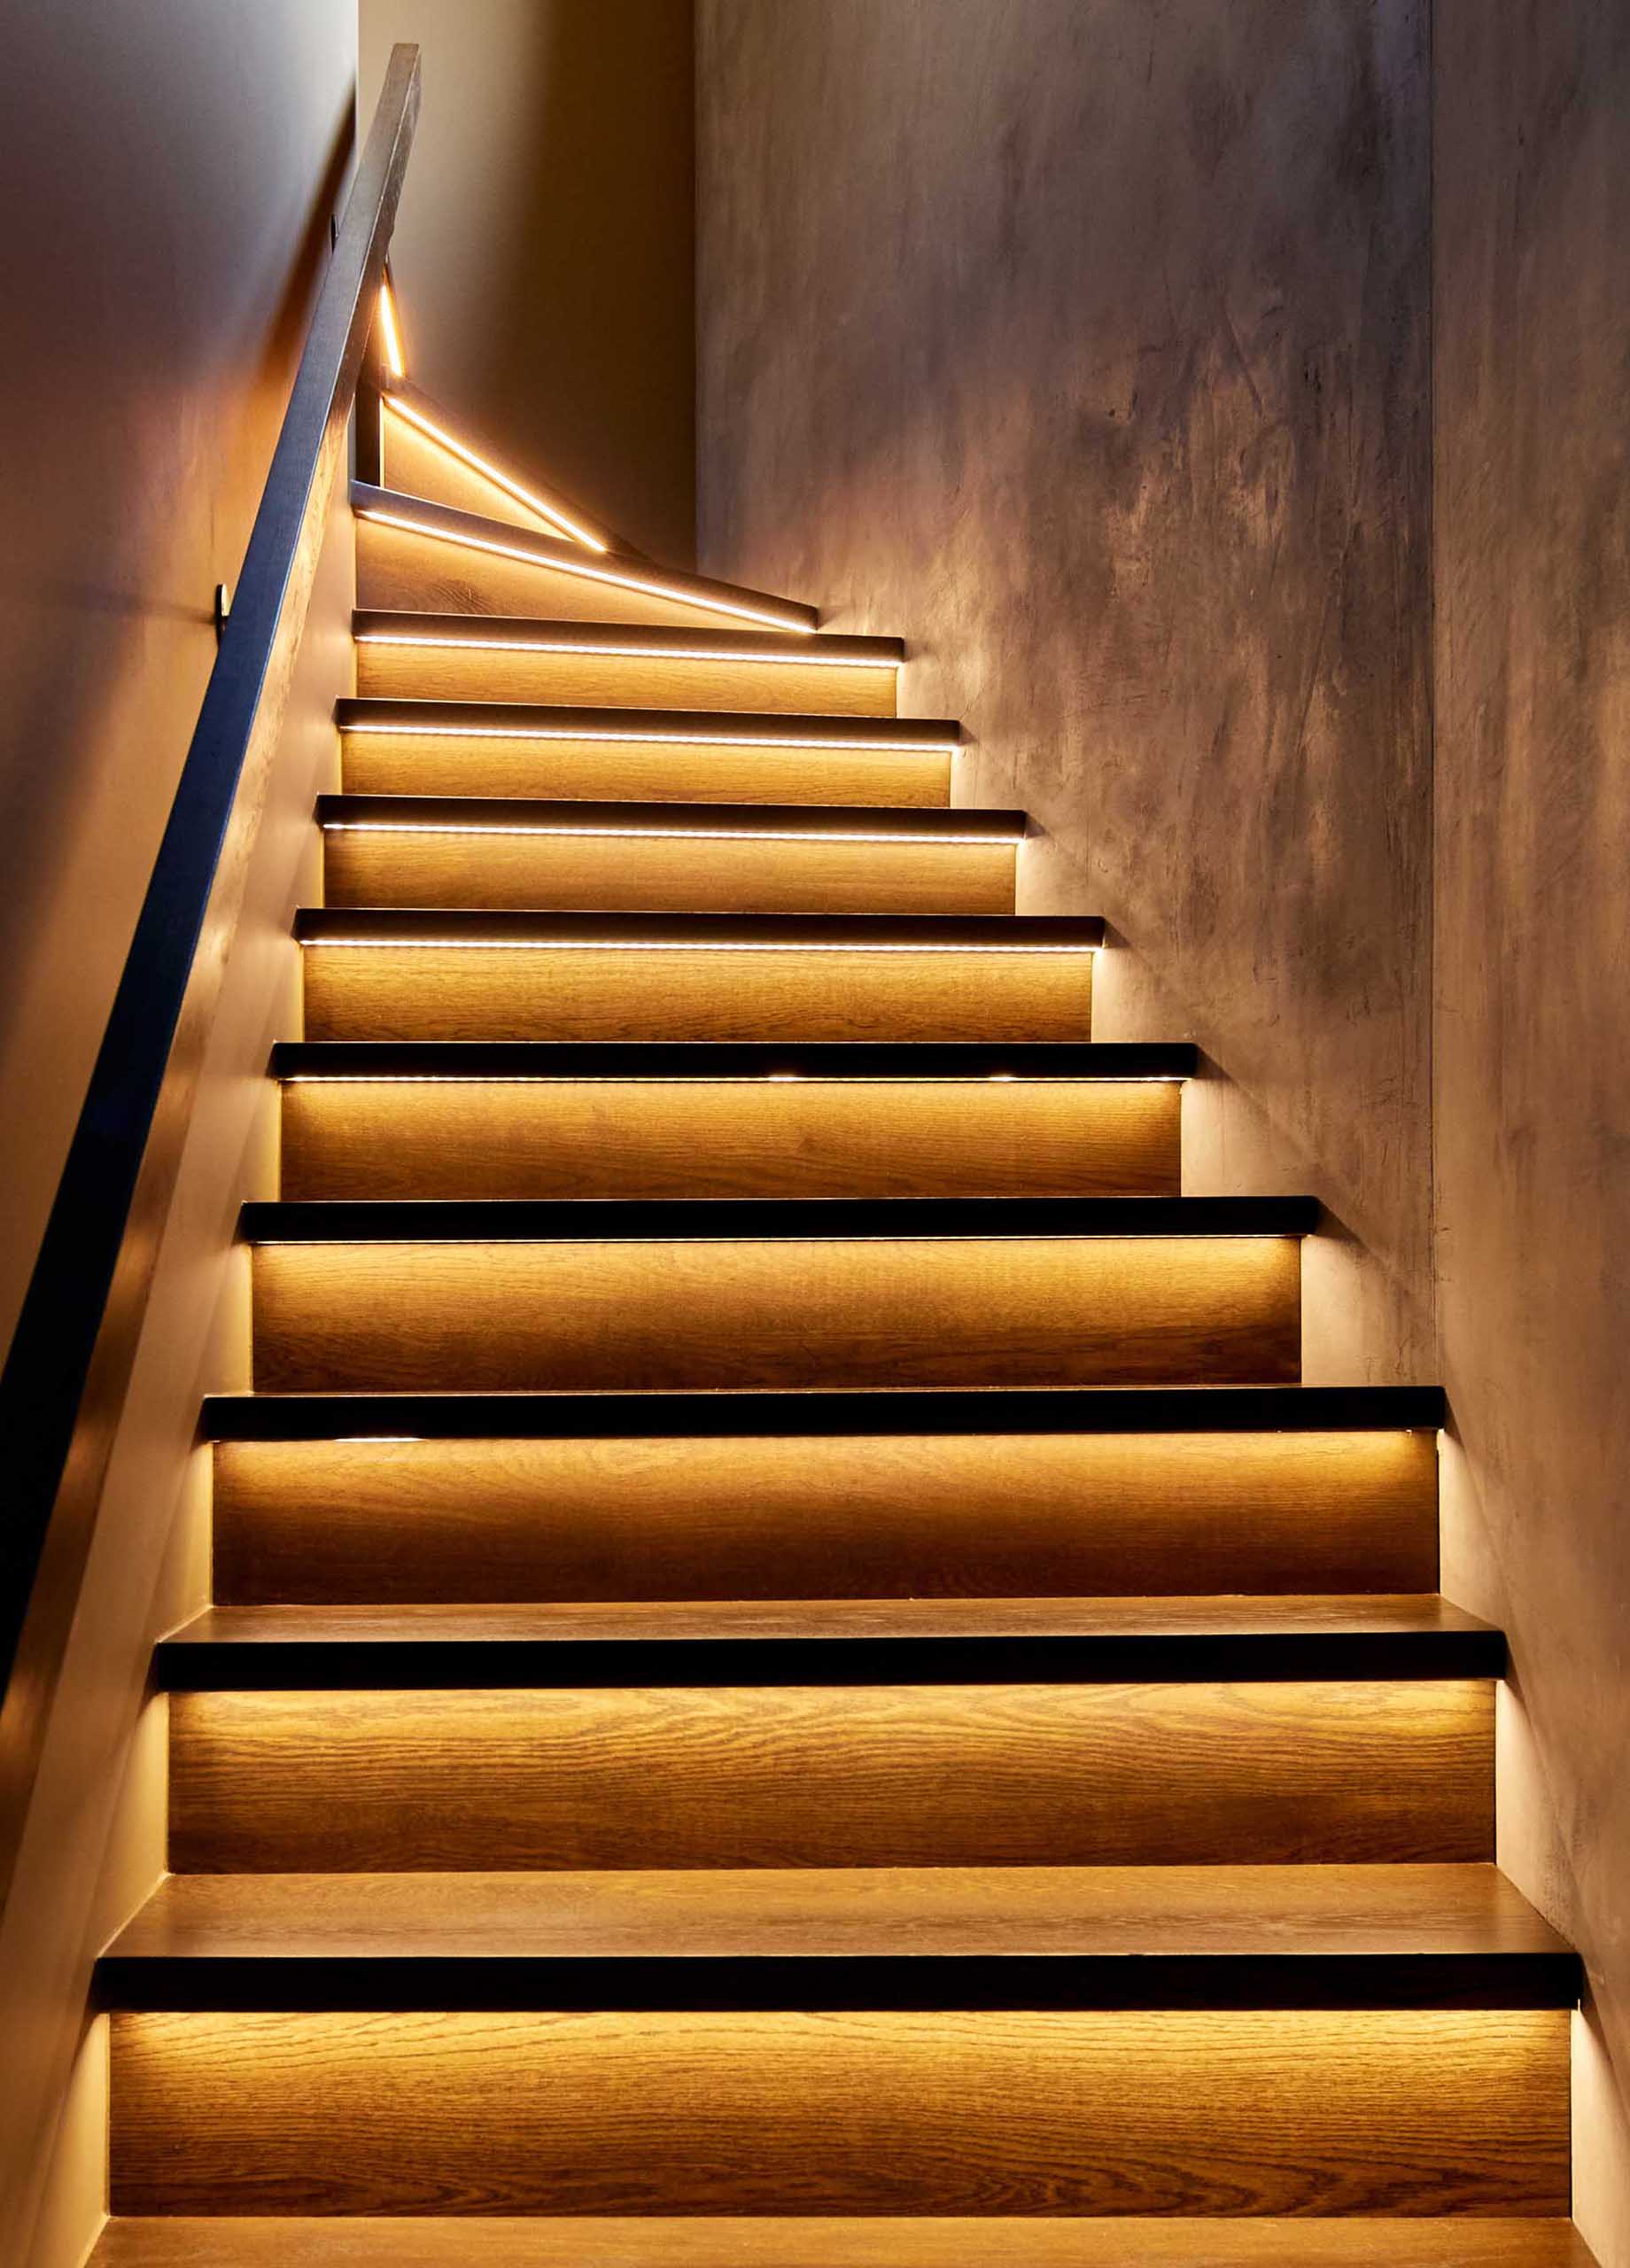 In a close-up look at these modern stairs, you can see the hidden LED lighting strips that are located underneath the tread, and highlight the stair riser.